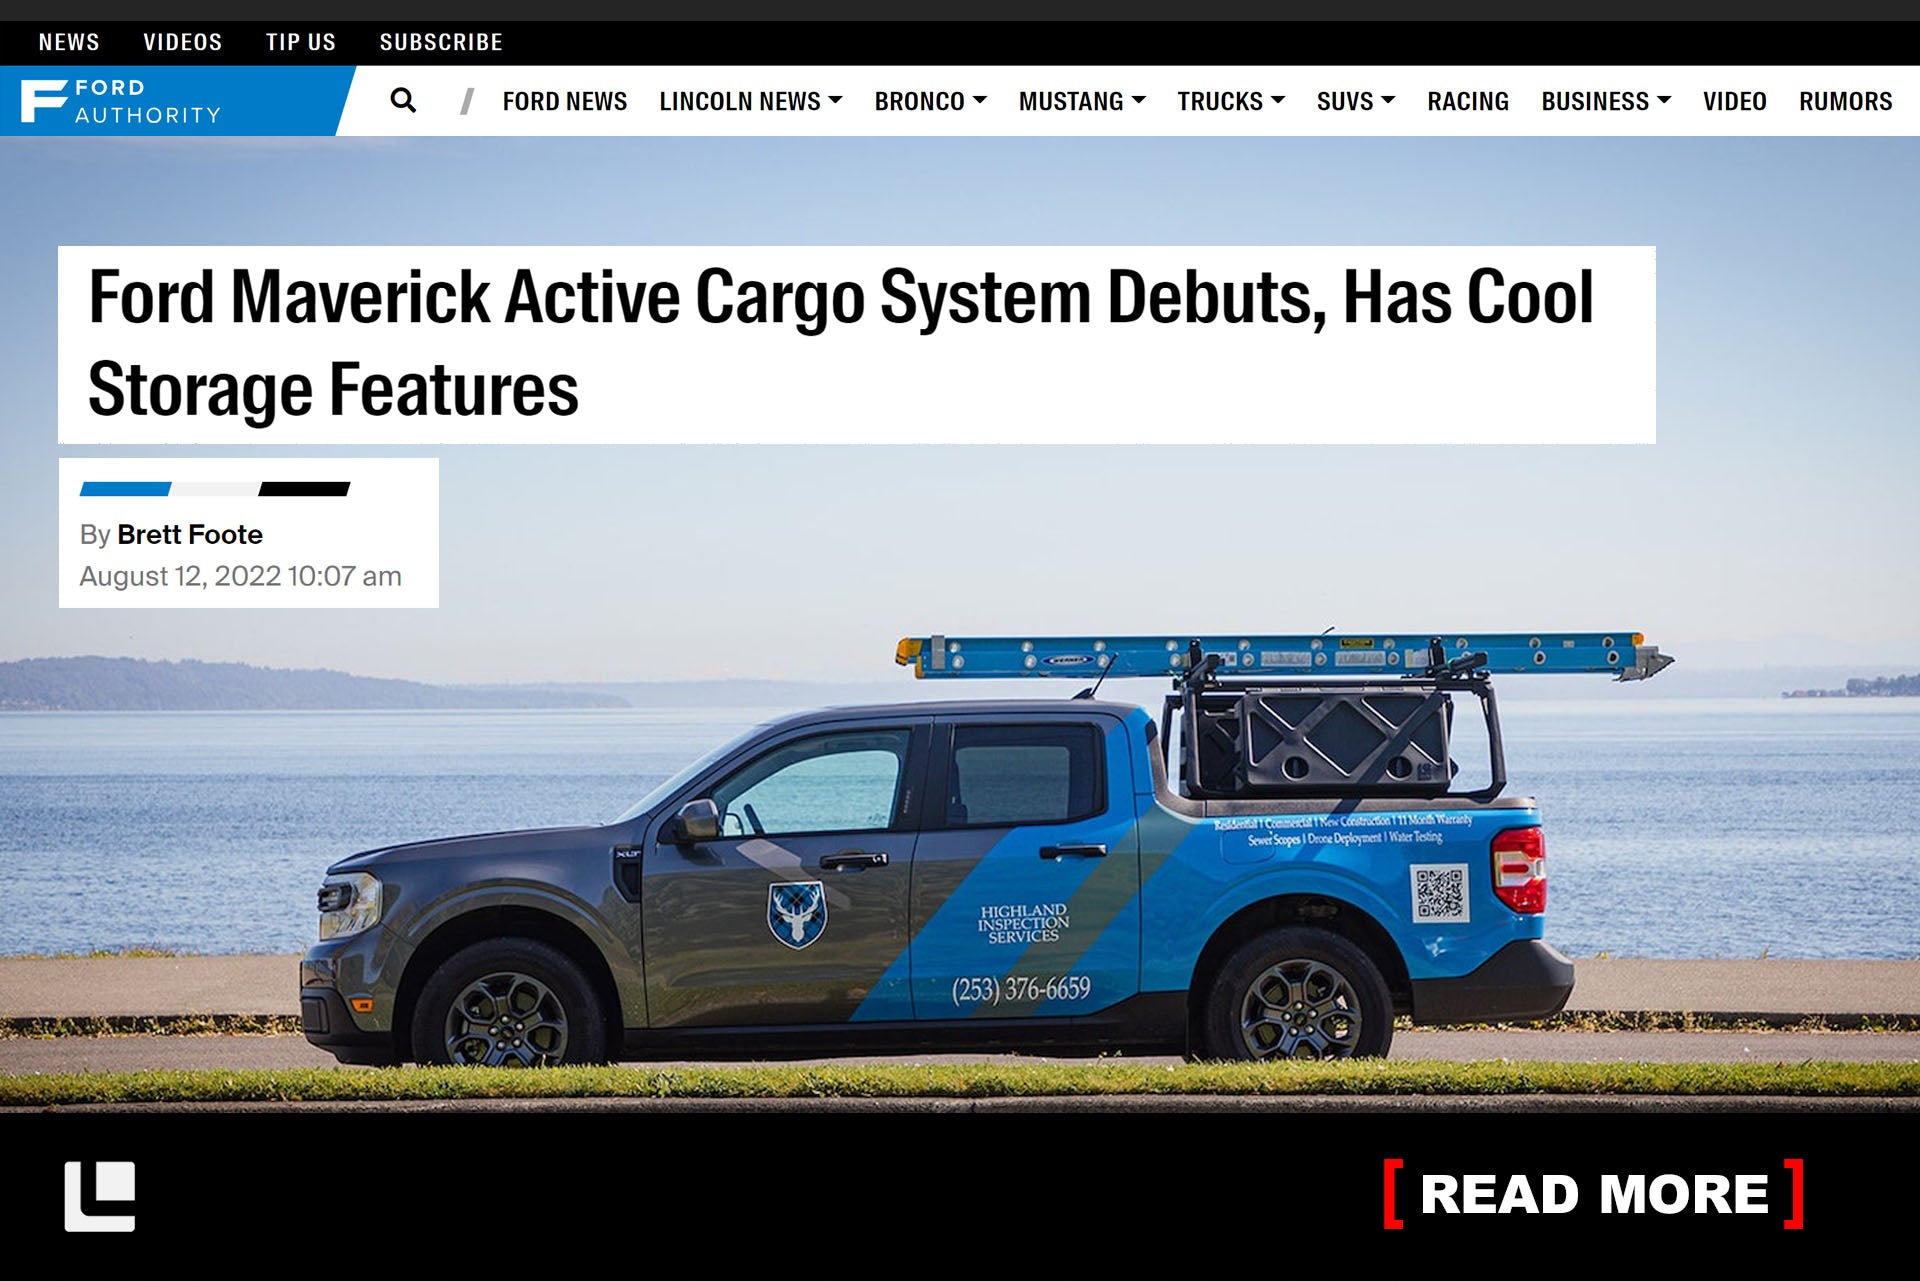 New ACS Forged Rack for Ford Maverick Featured in MotorTrend